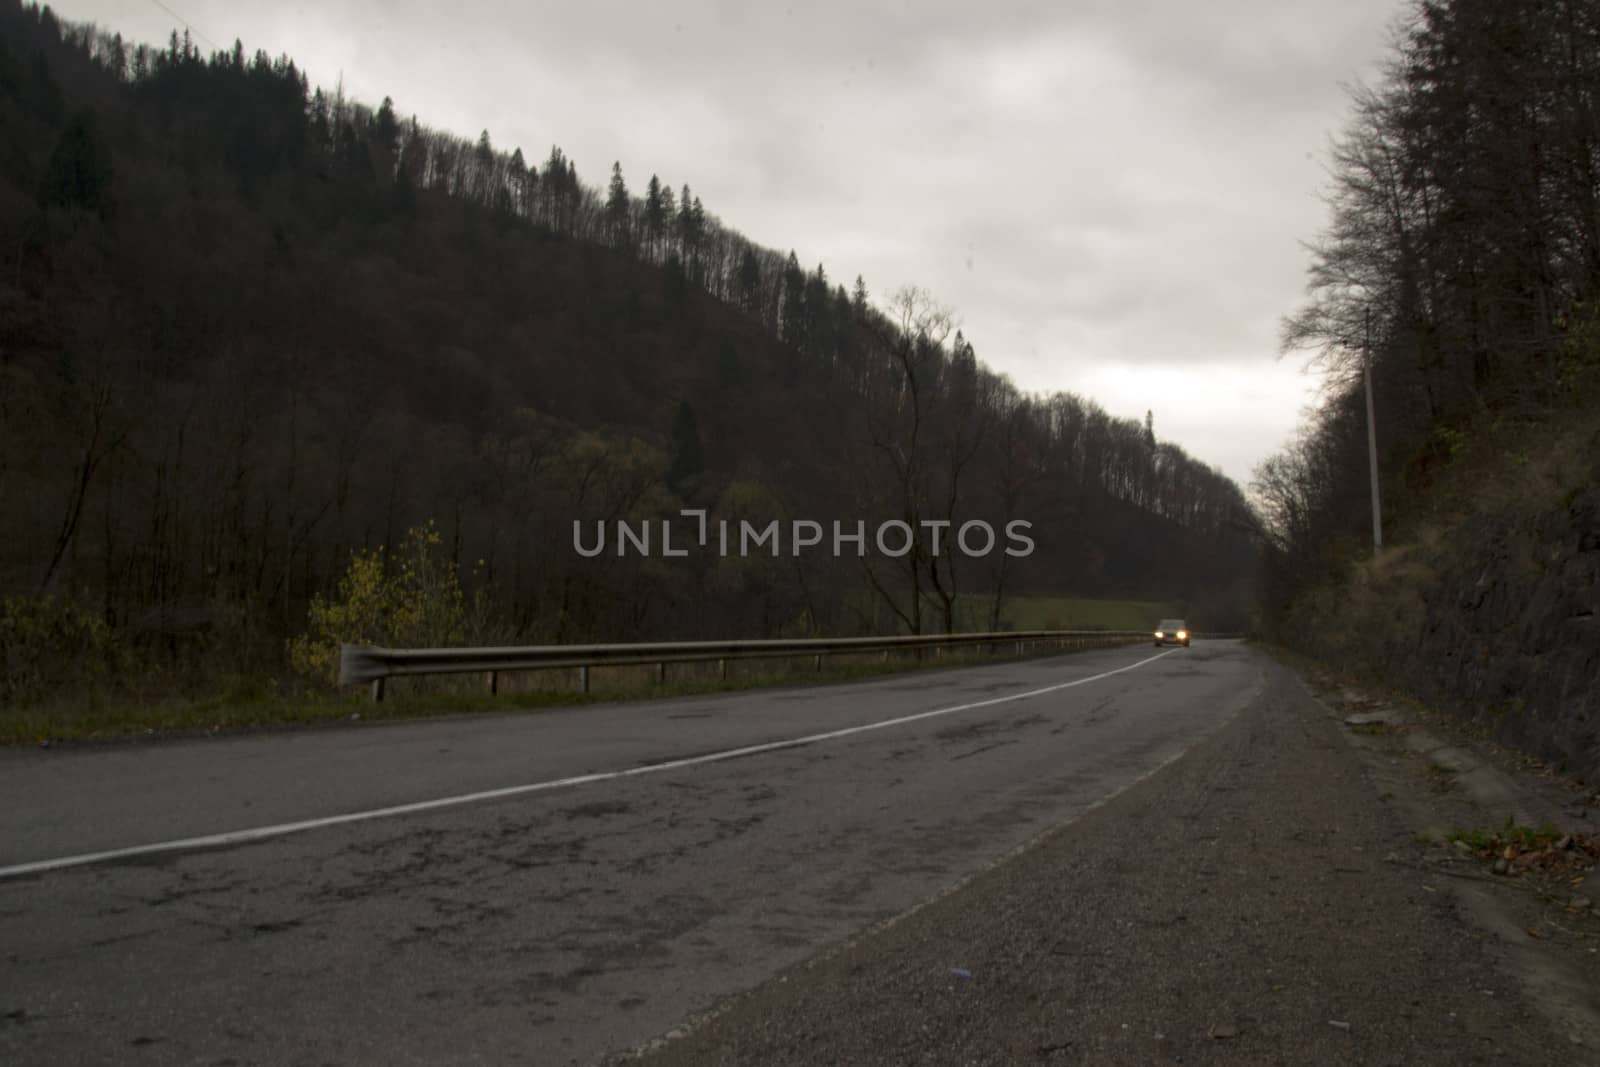 Car on a mountain road at dusk by Irene1601